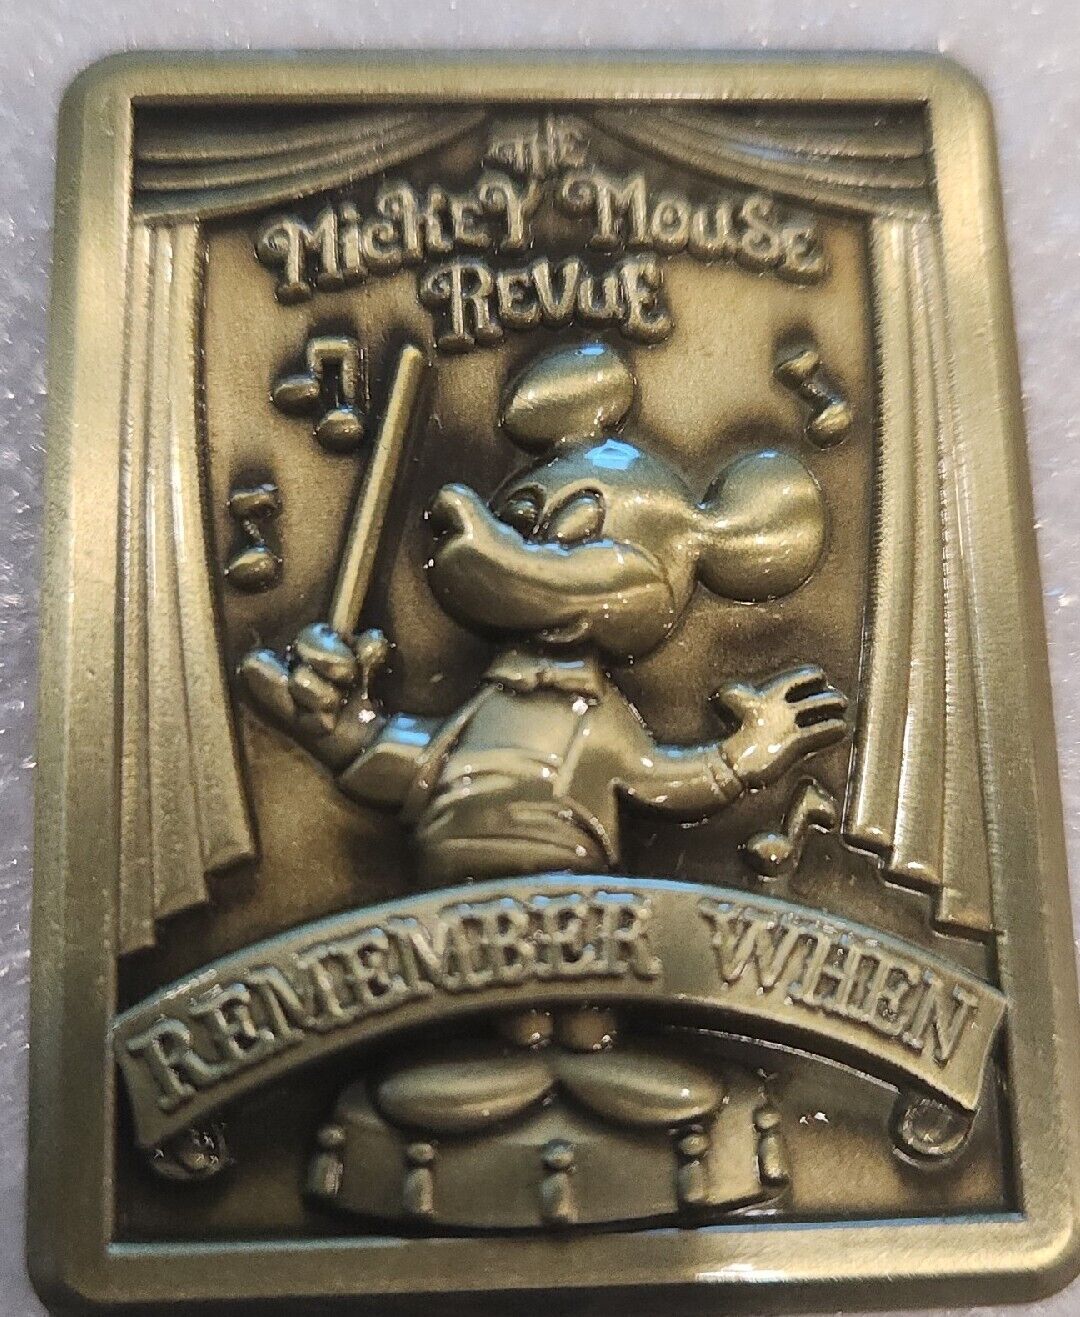 Disney Pin 00009 Mickey Mouse Revue Remember When AP Sample Artist Proof LE 25